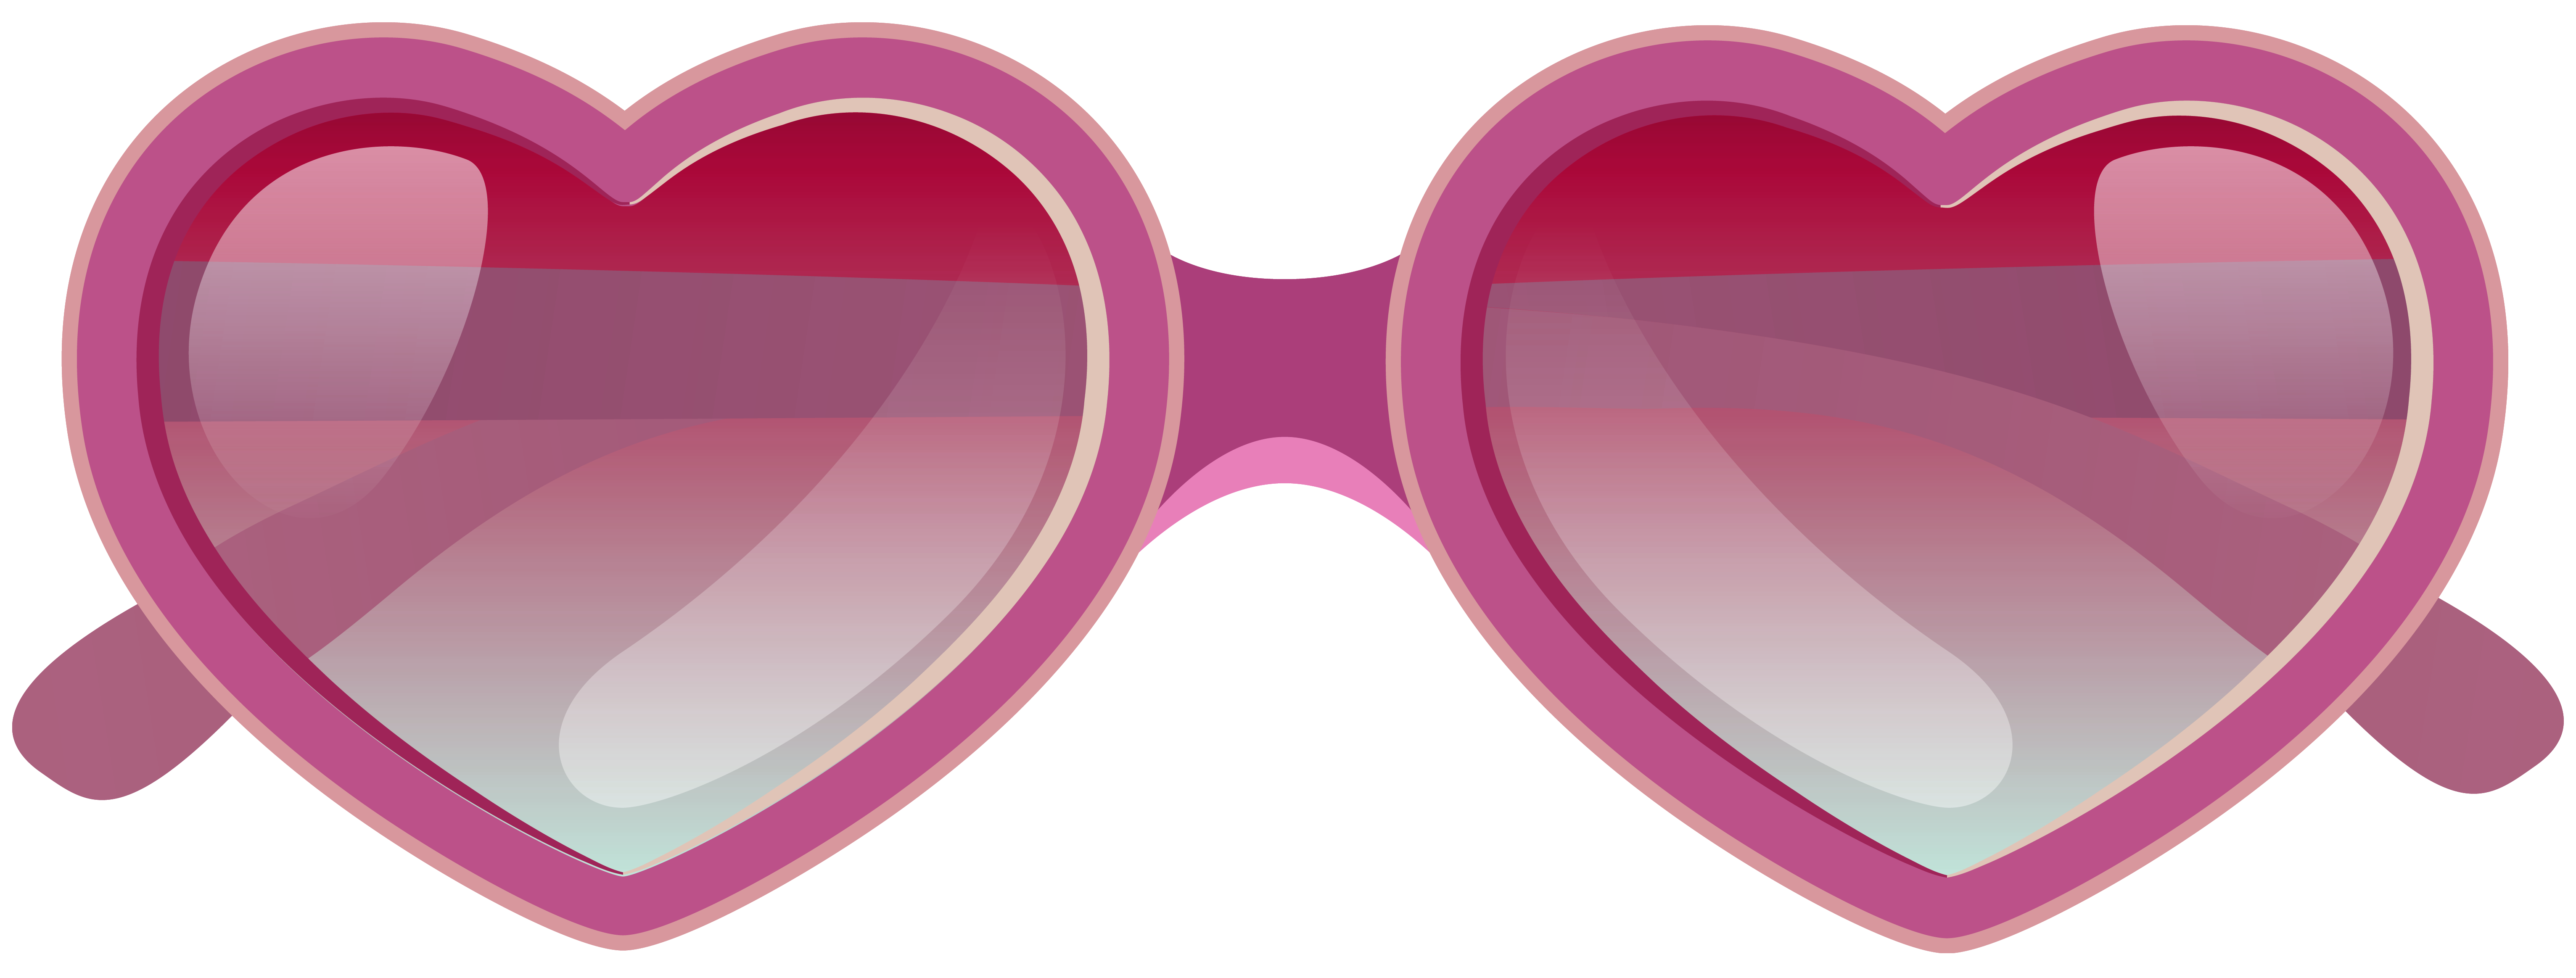 Png image gallery yopriceville. Sunglasses clipart pink heart